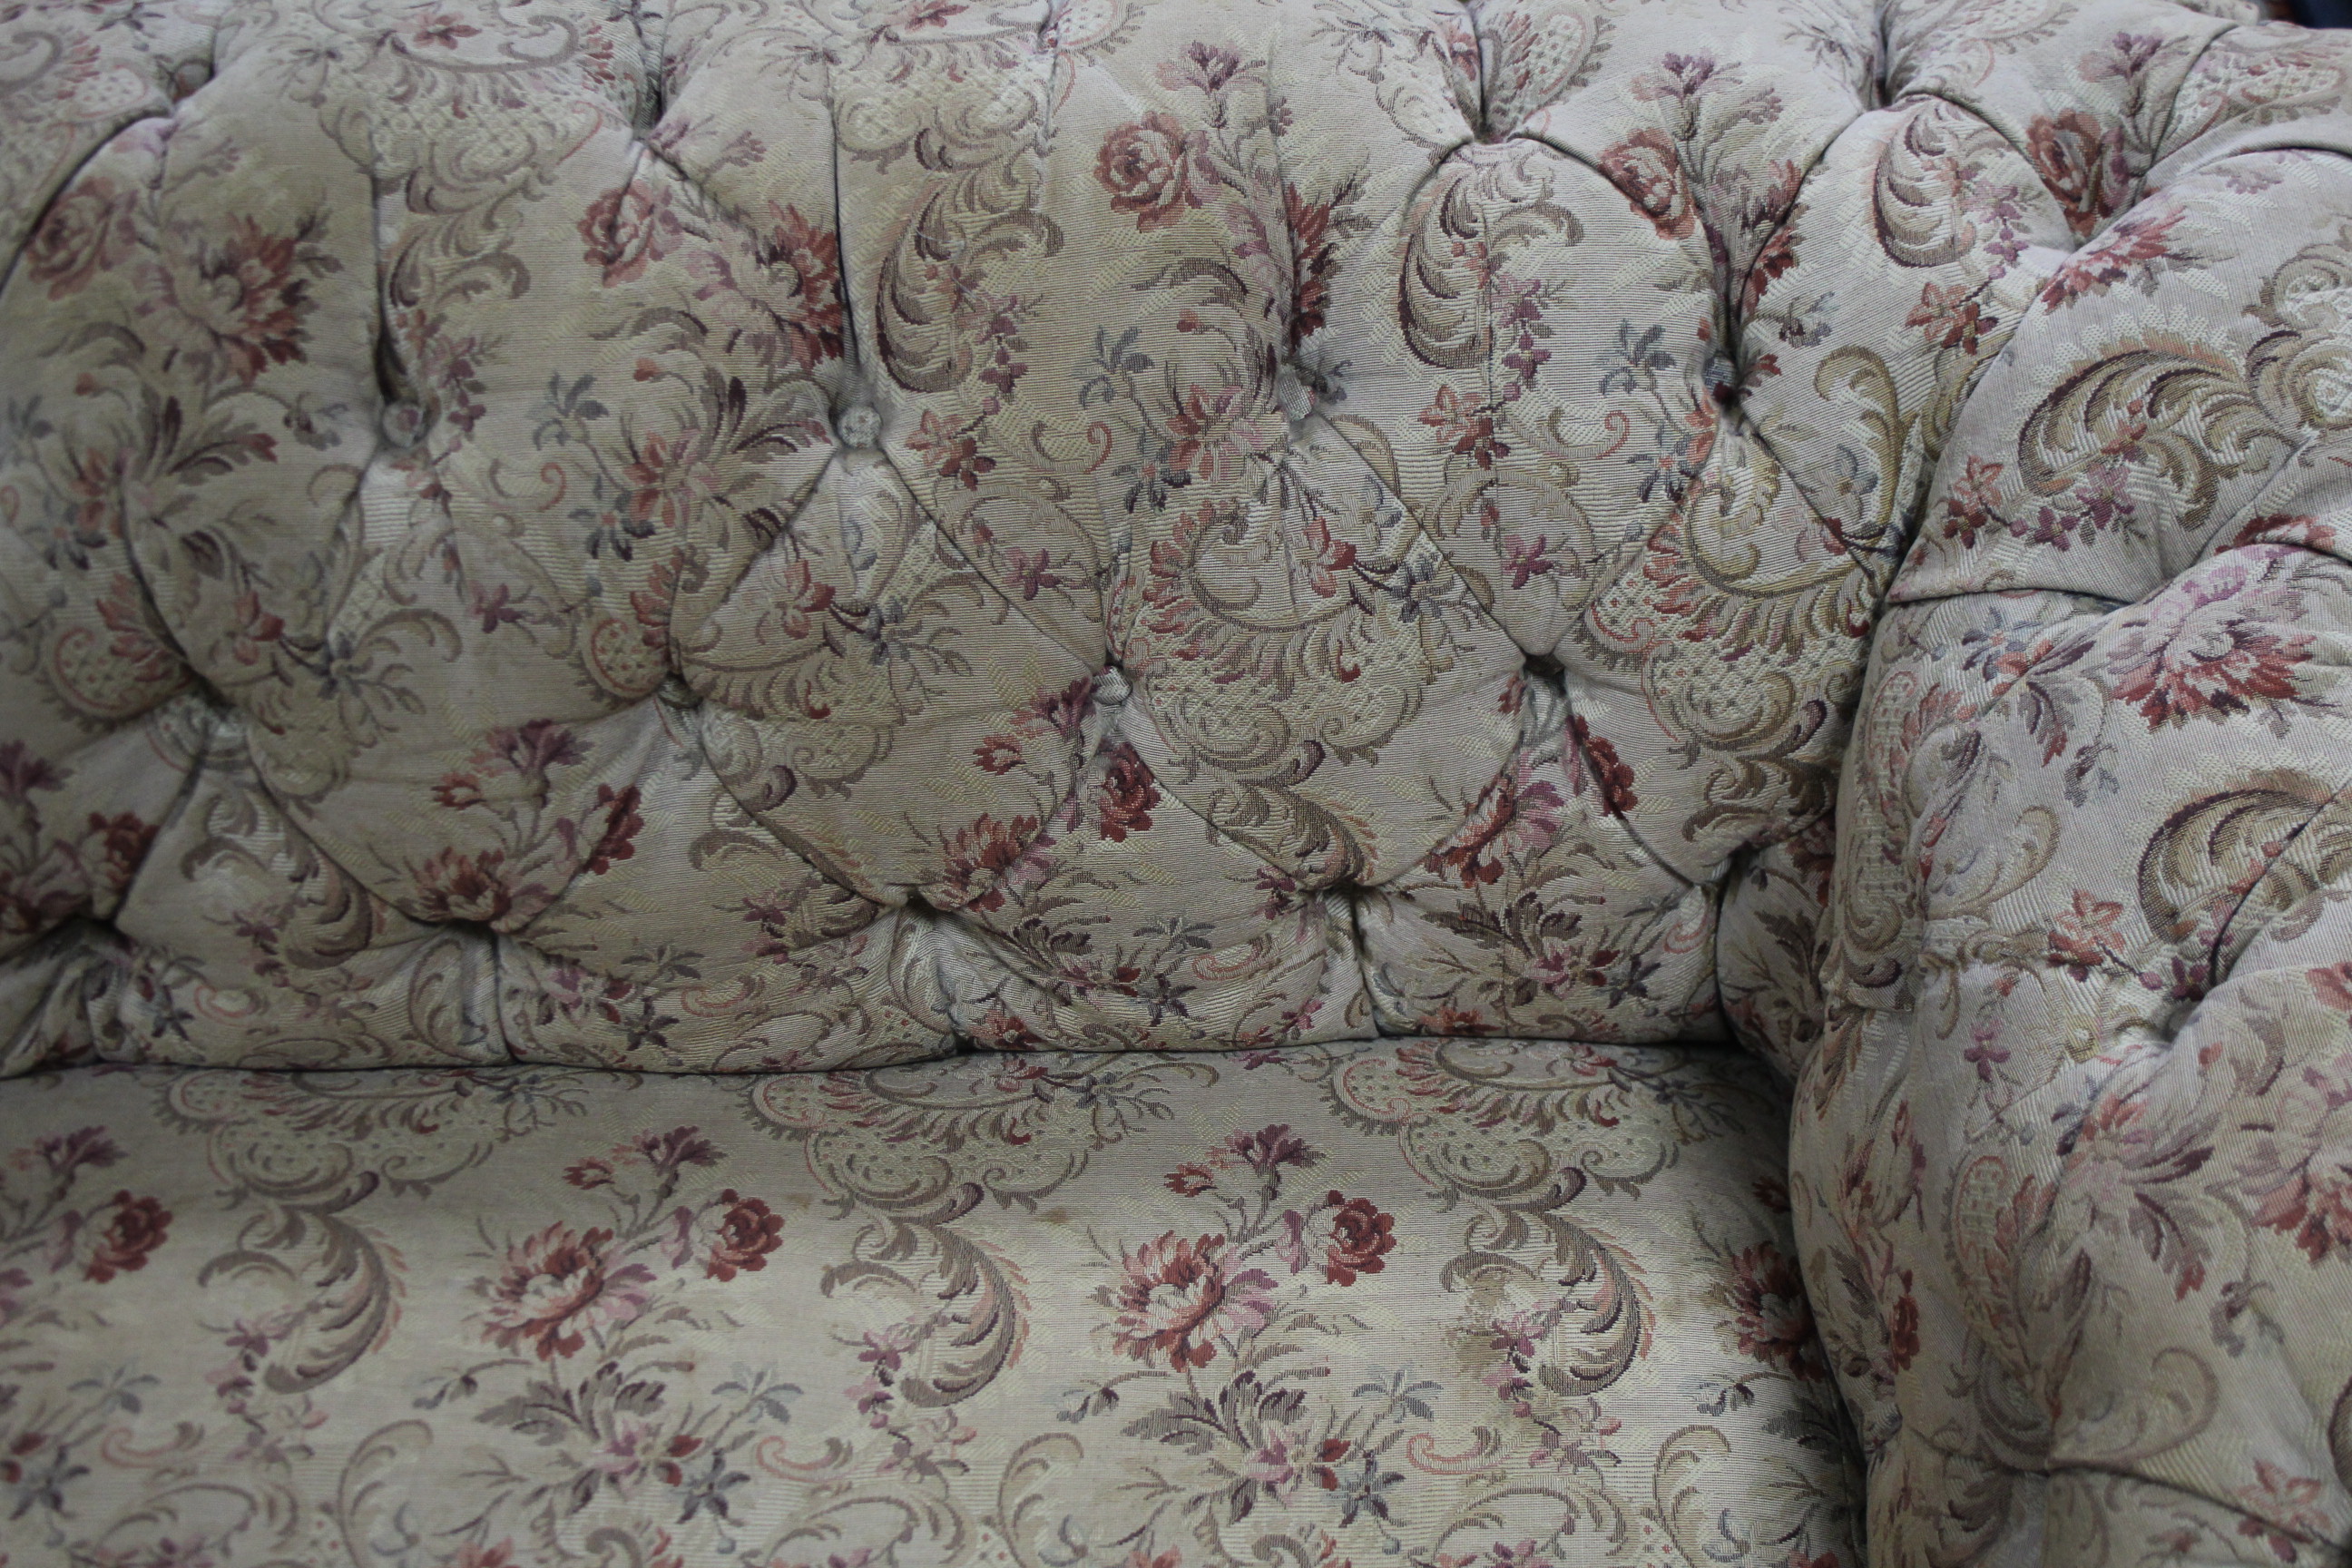 A Victorian buttoned chesterfield three-seater settee upholstered multi-coloured floral - Image 2 of 3